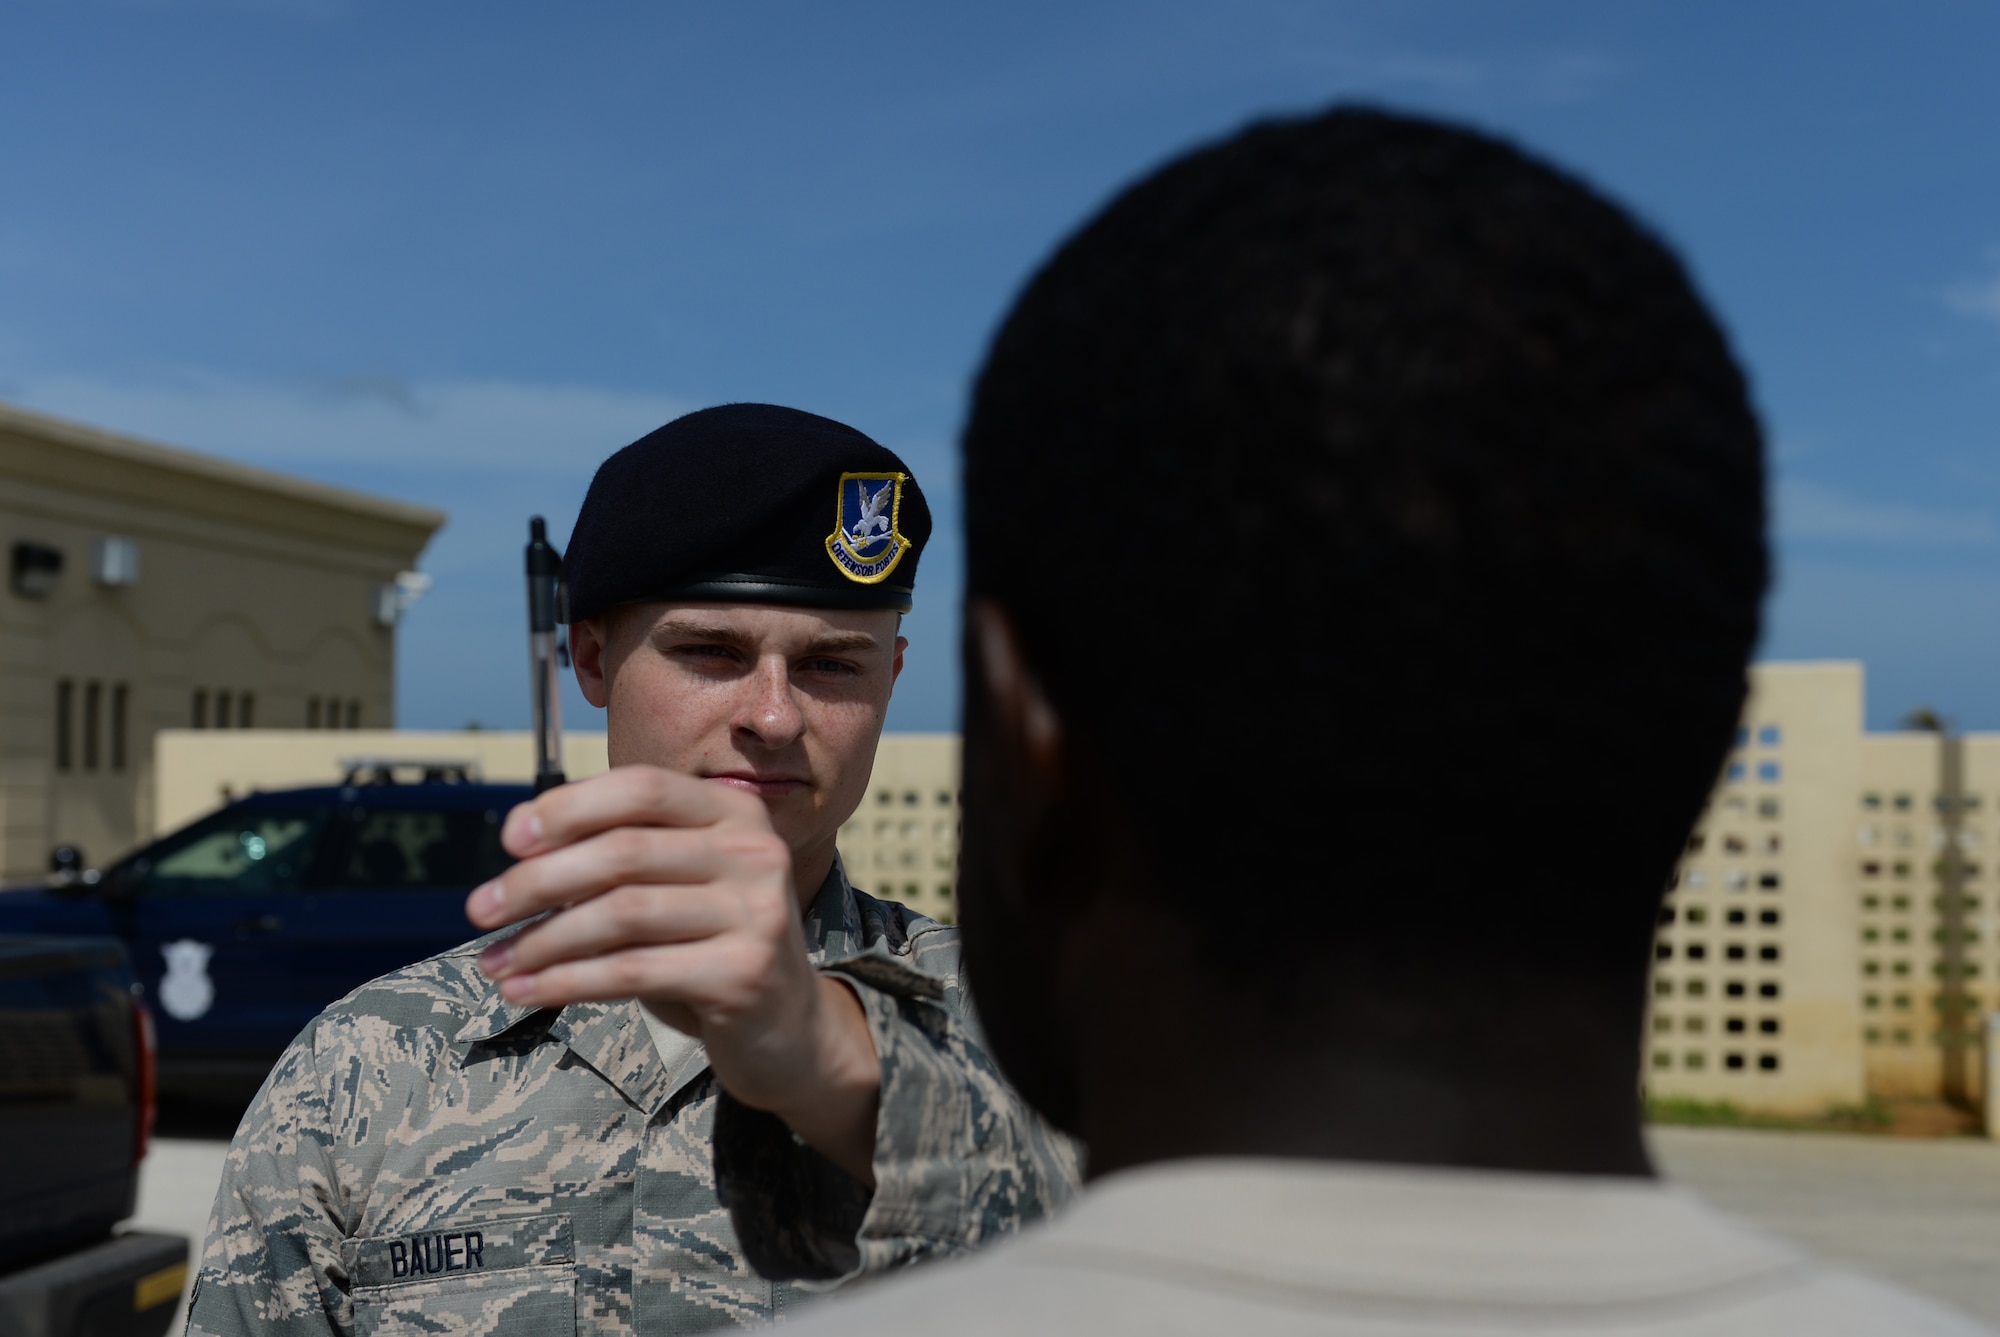 Airman Austin Bauer, 36th Security Forces Squadron, left, conducts a horizontal gaze nystagmus test during field sobriety test training Jan. 29, 2016, at Andersen Air Force Base, Guam. Security Forces members practiced conducting sobriety tests to include the one-leg stand, walk and turn, and horizontal gaze nystagmus test as part of their field sobriety test training. (U.S. Air Force photo/Airman 1st Class Jacob Skovo)